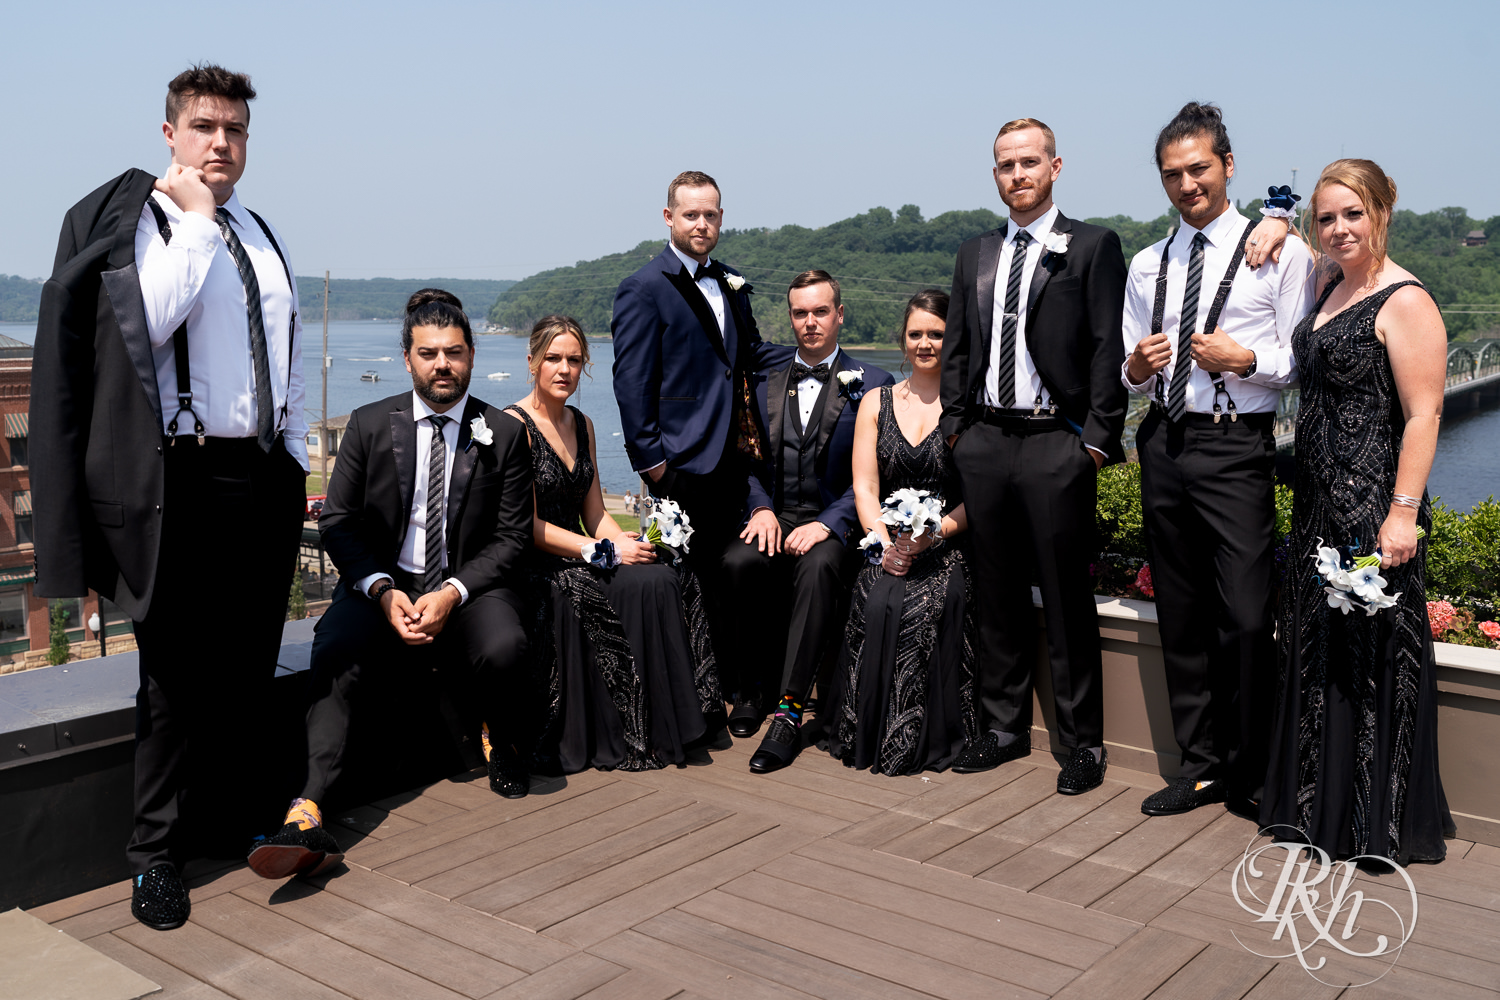 Grooms in blue tuxedos pose stoically on rooftop with wedding party before gay wedding in Stillwater, Minnesota.